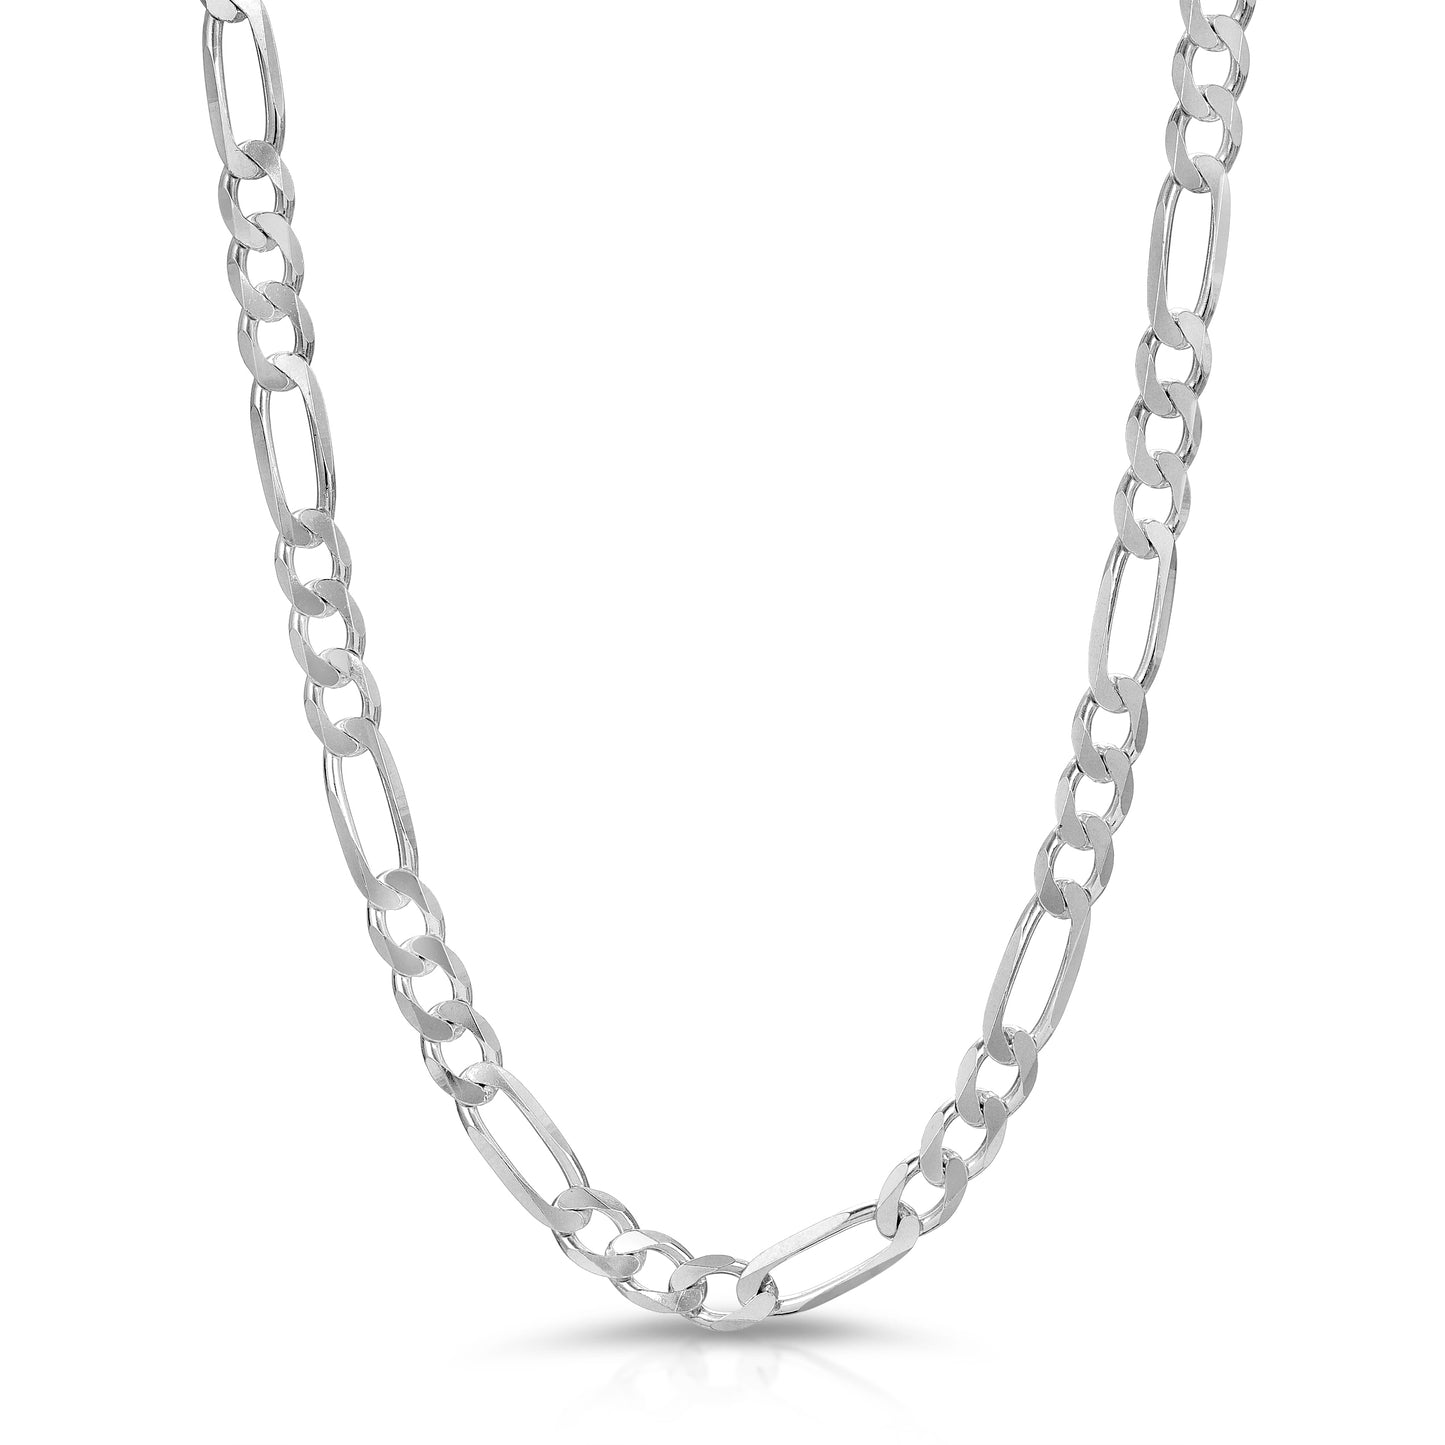 6.7mm Sterling silver 925 Figaro Chain 